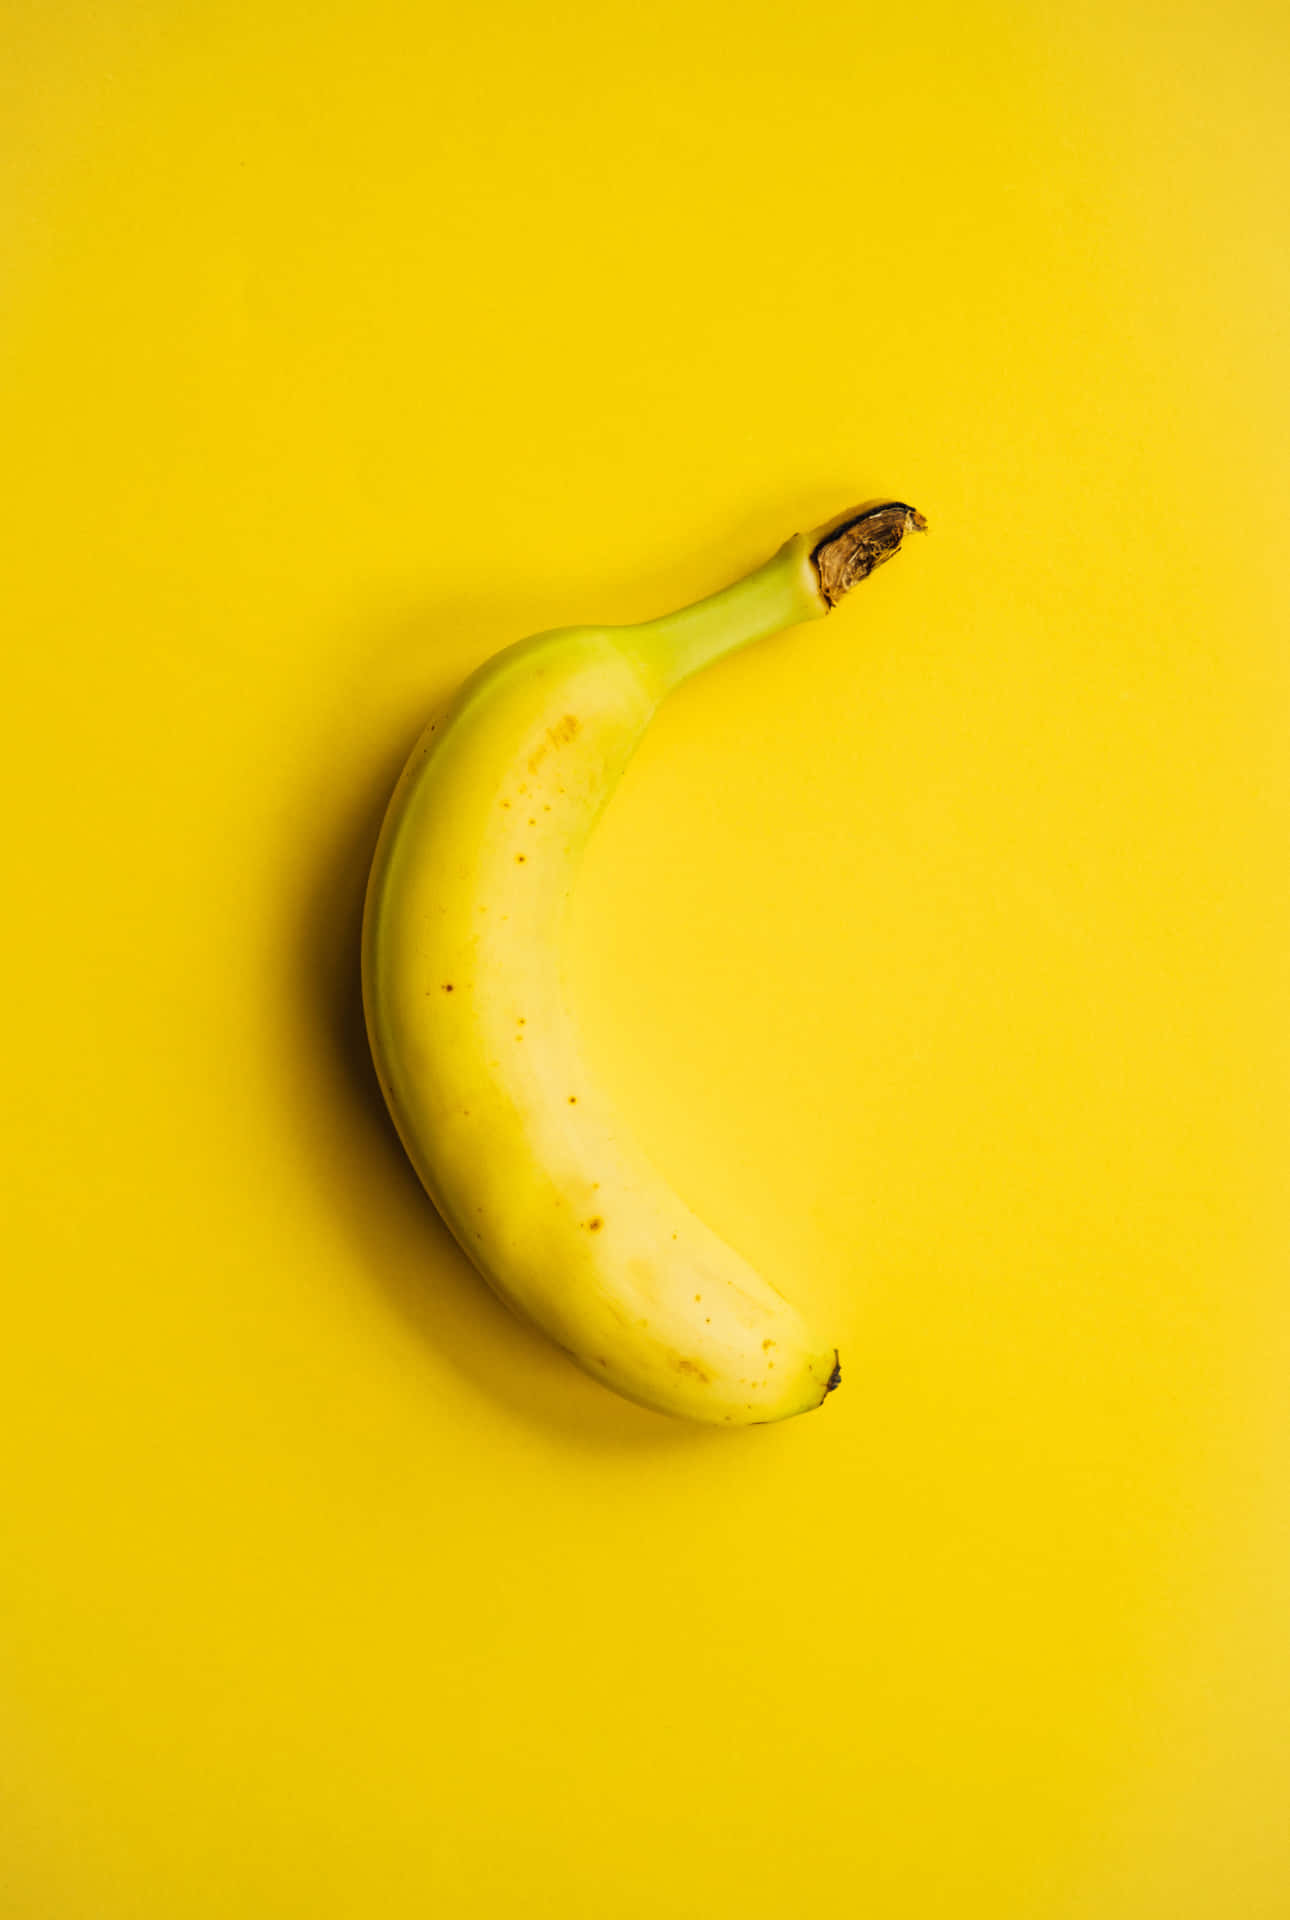 A Banana On A Yellow Background